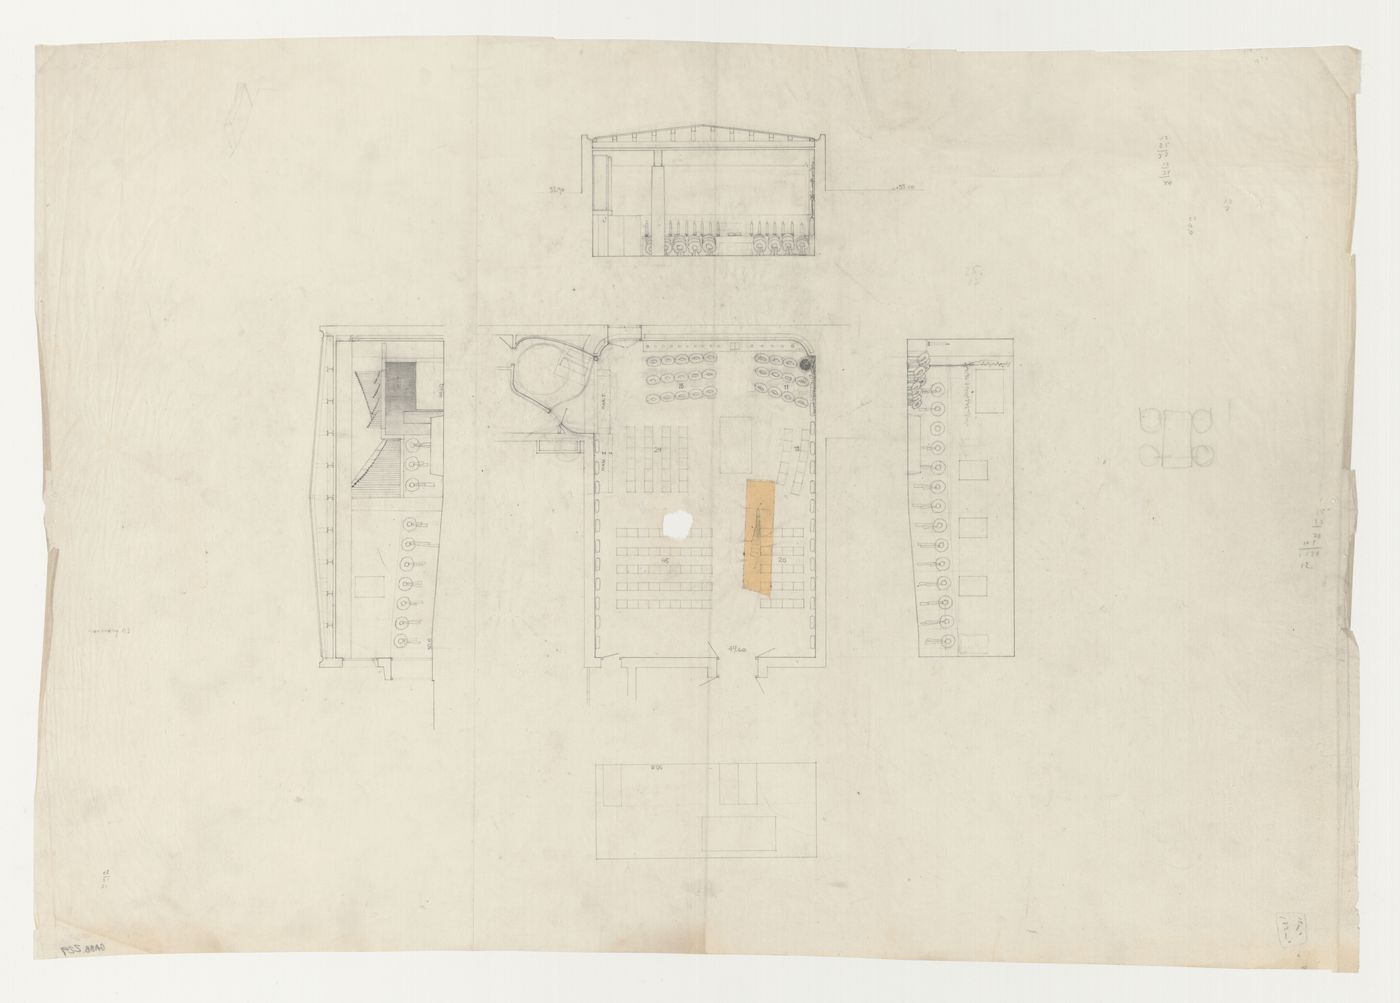 Plan and sections for the Chapel of the Holy Cross, Woodland Crematorium, Woodland Cemetery, Stockholm, Sweden